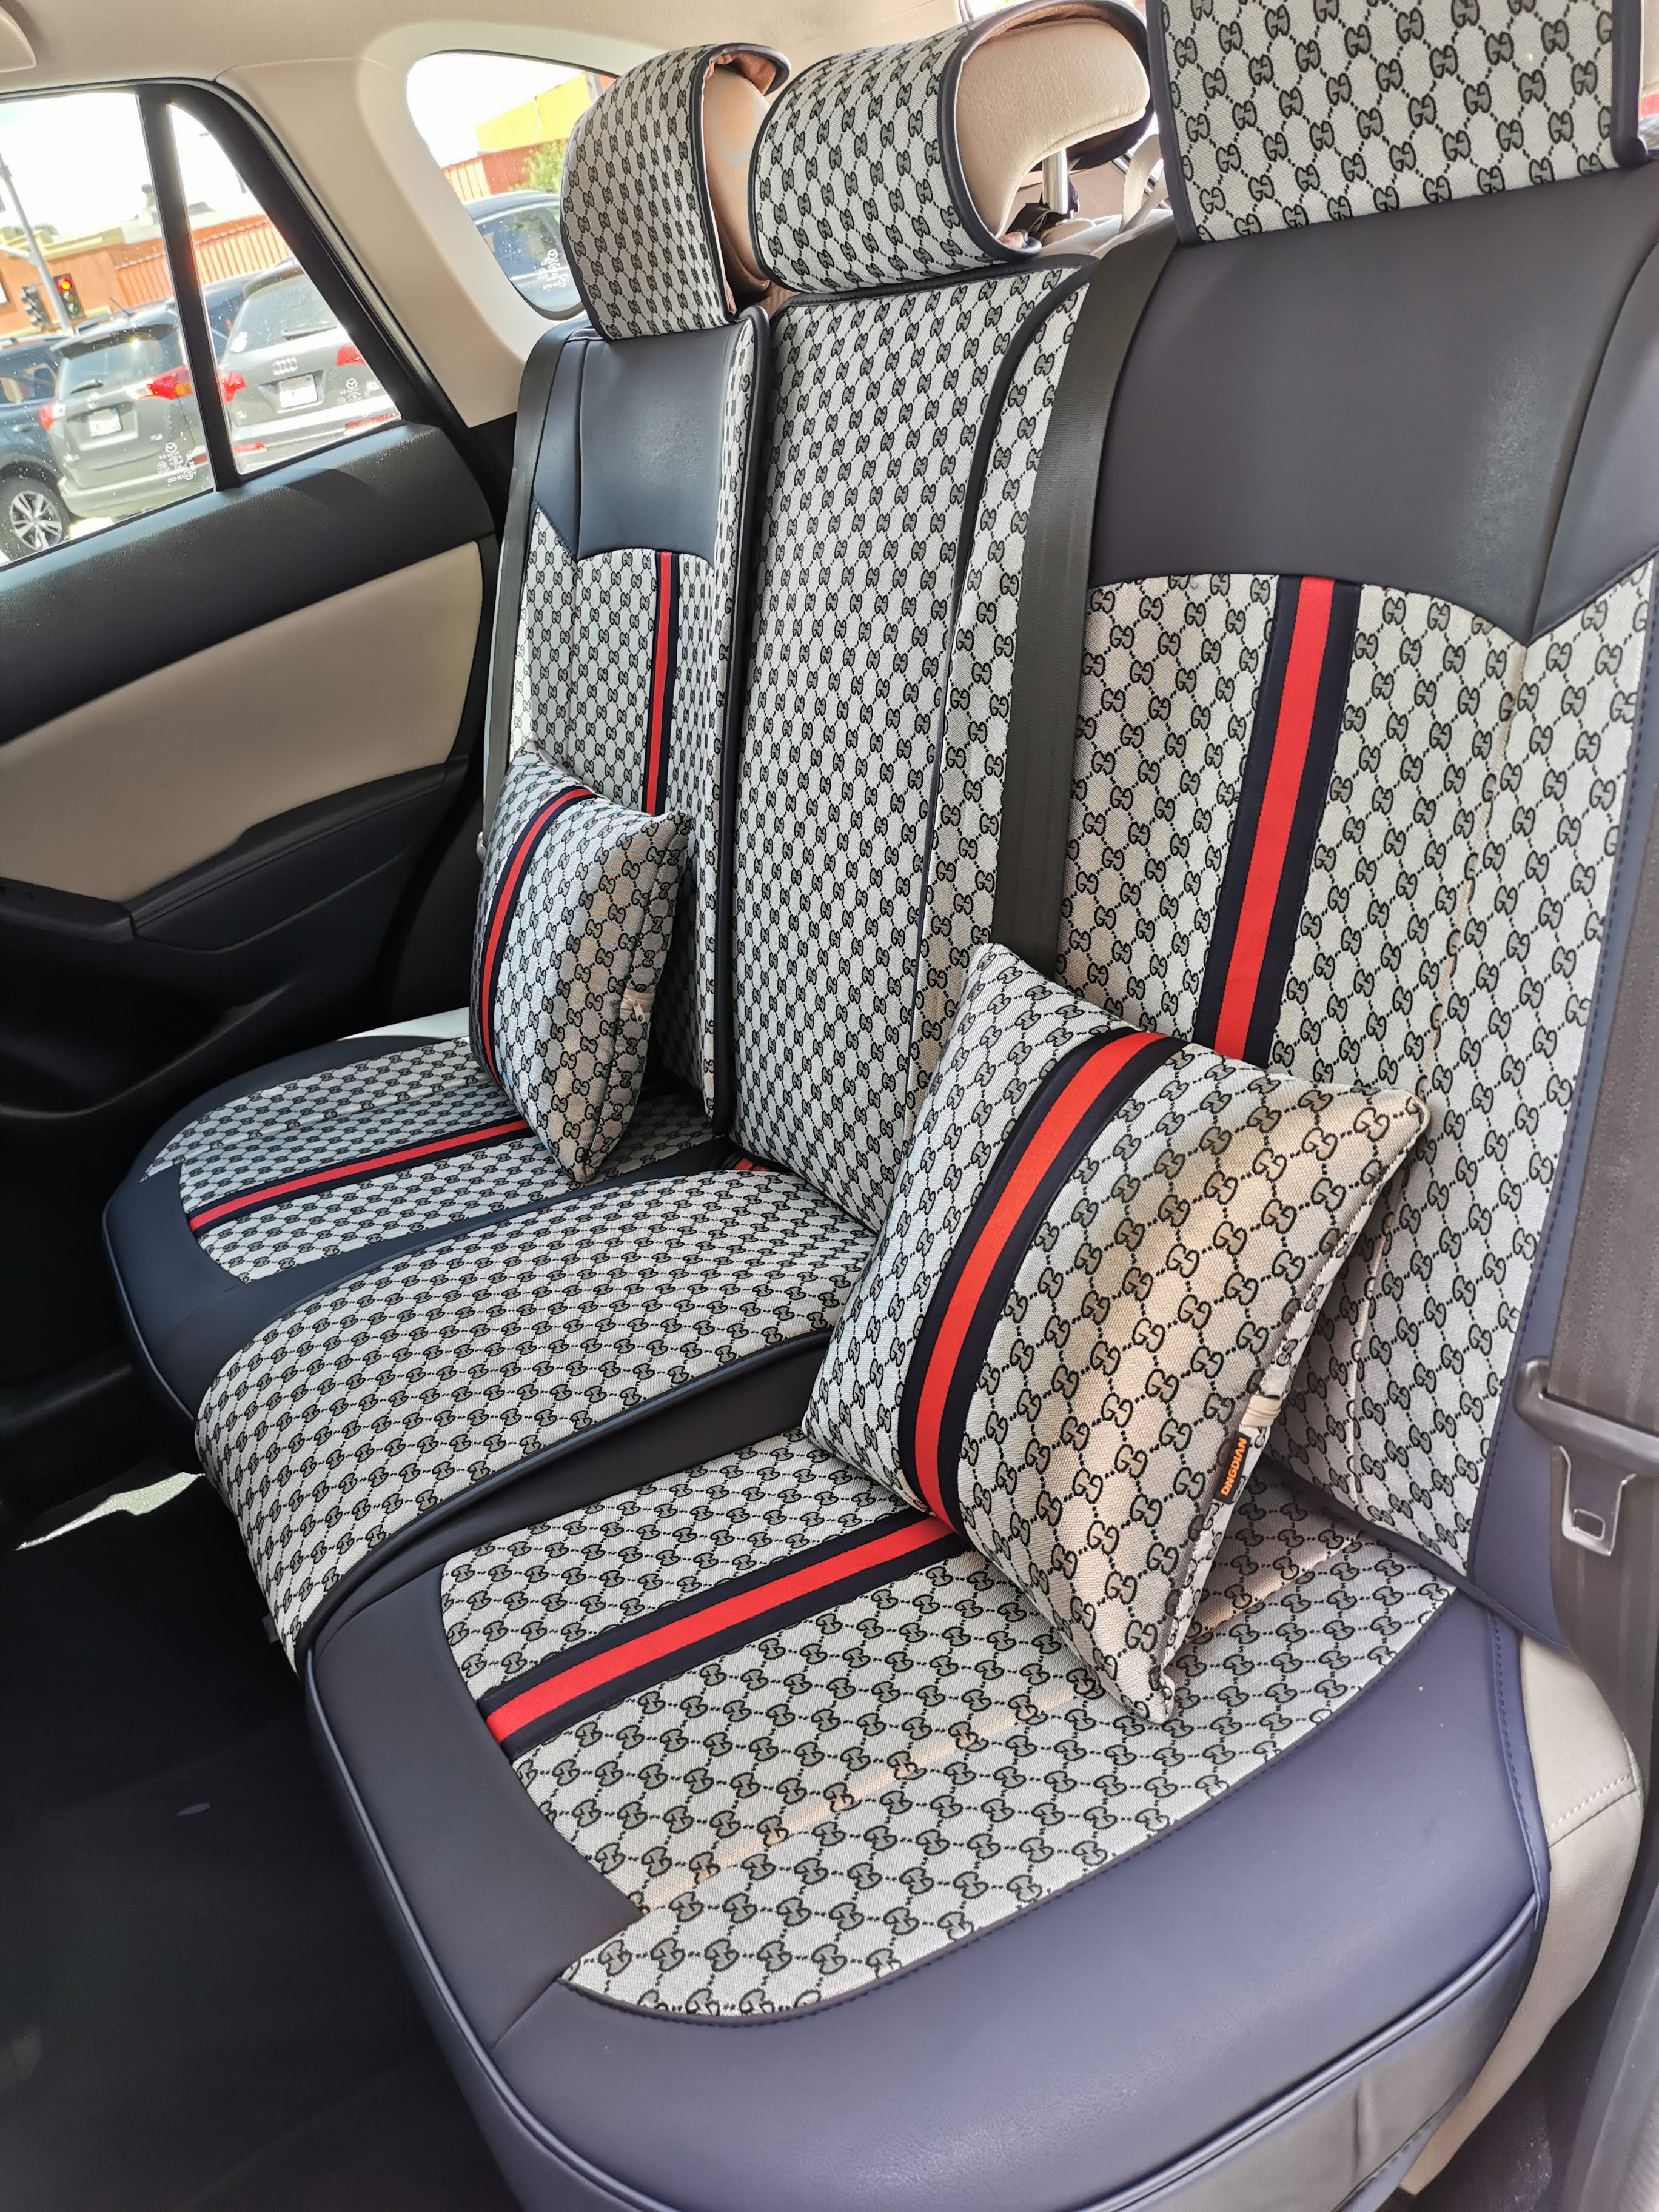 Mazda 6 Seat Cover Installed – Car Seat Cover and Custom Car Floor Mat